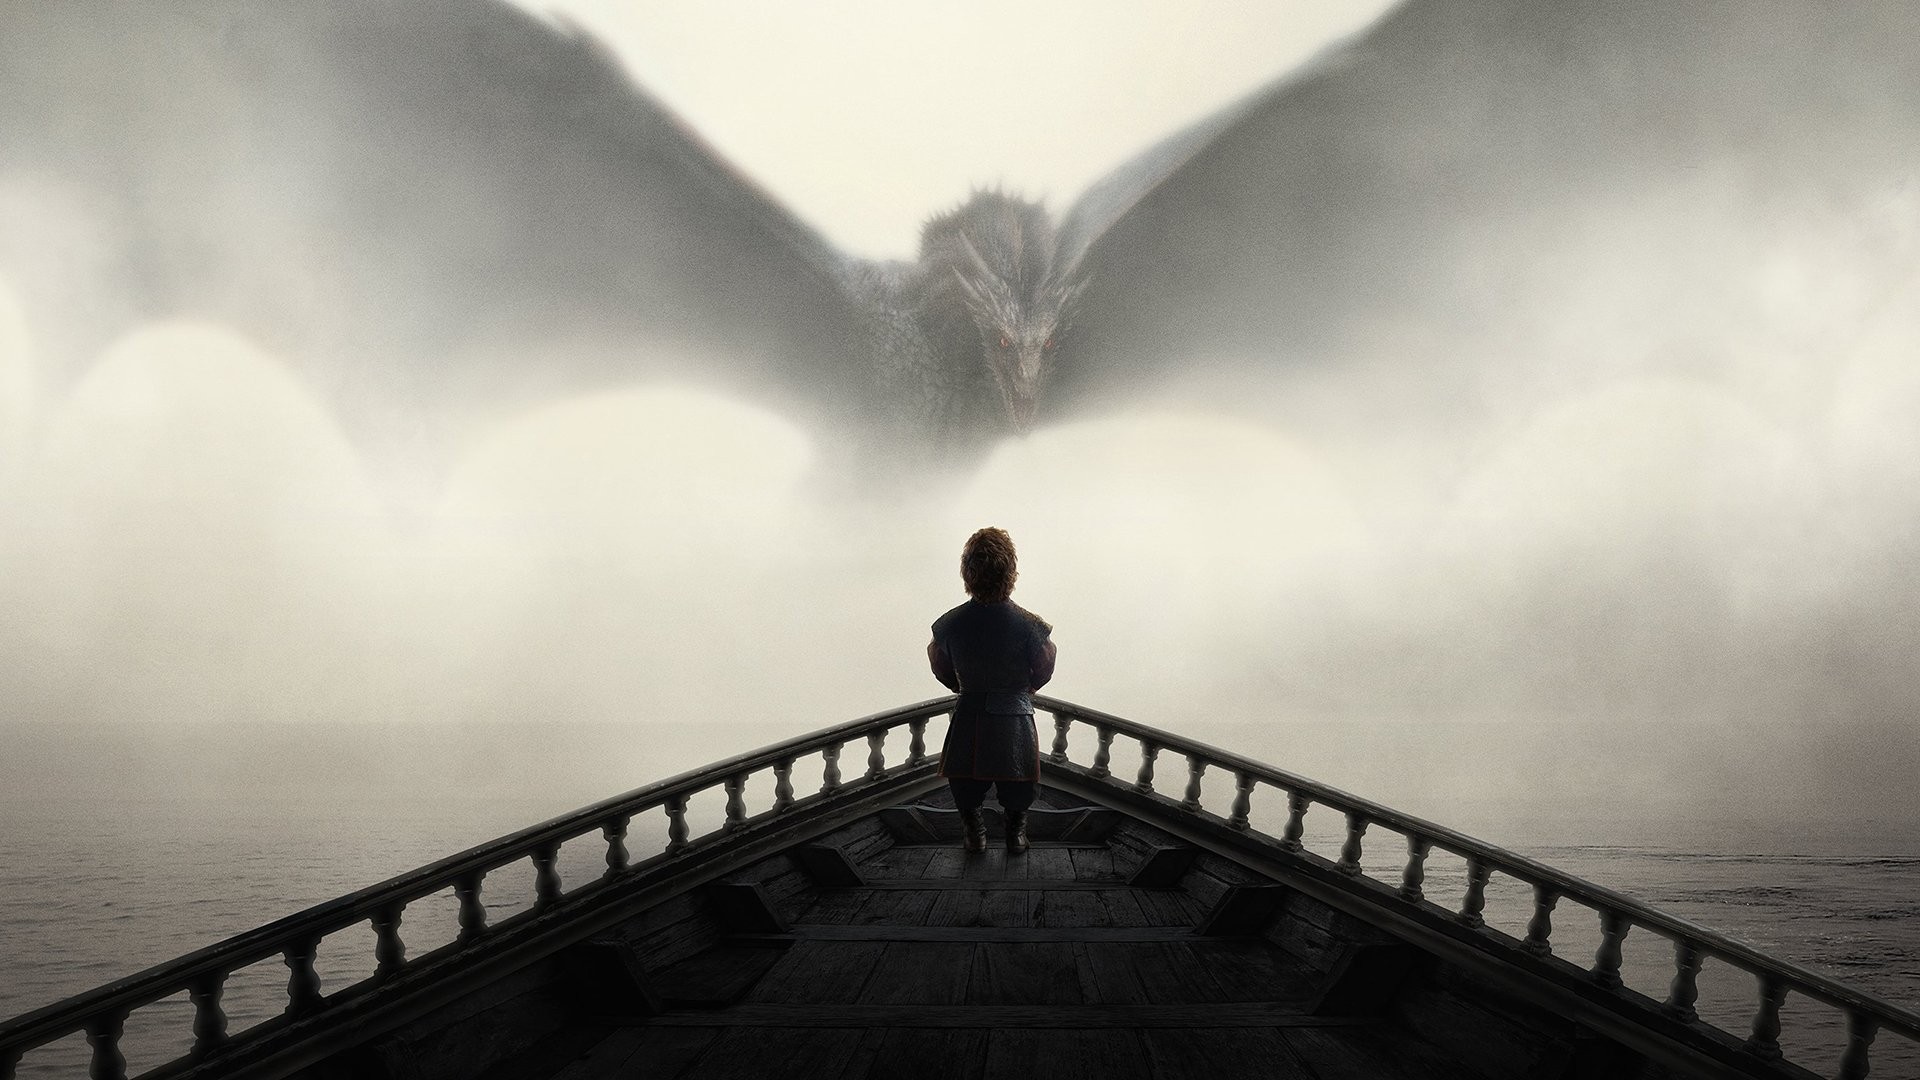 Game of Thrones wallpaper ·① Download free awesome HD ...